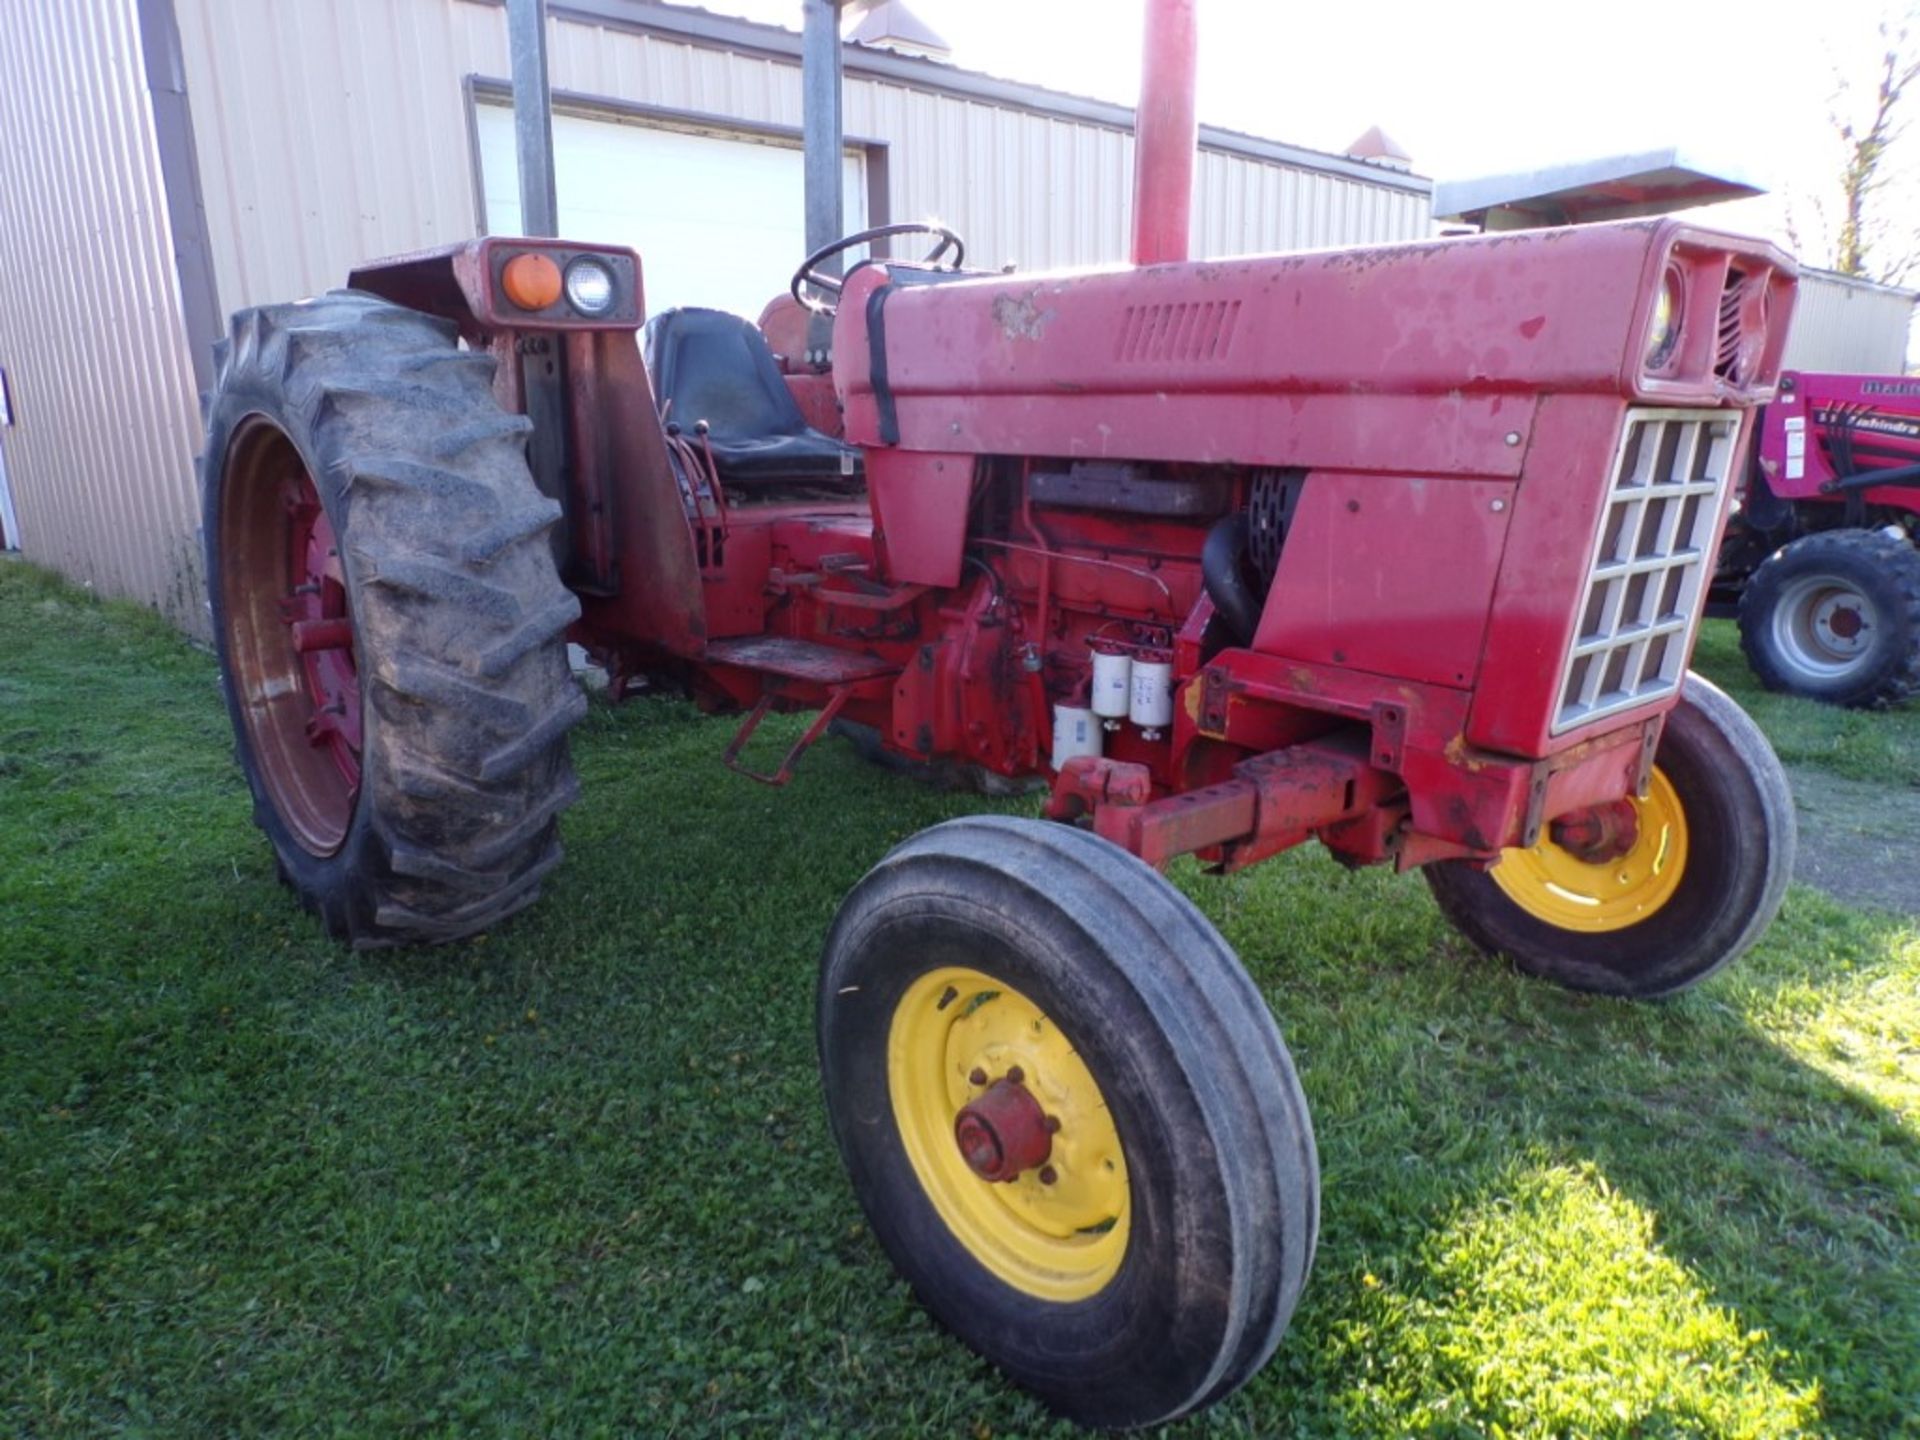 64' International 784 Row Crop with Canopy, 65 HP, 2 WD, Wheel Weights, Dual PTO, Dual Hydraulics, - Image 4 of 4